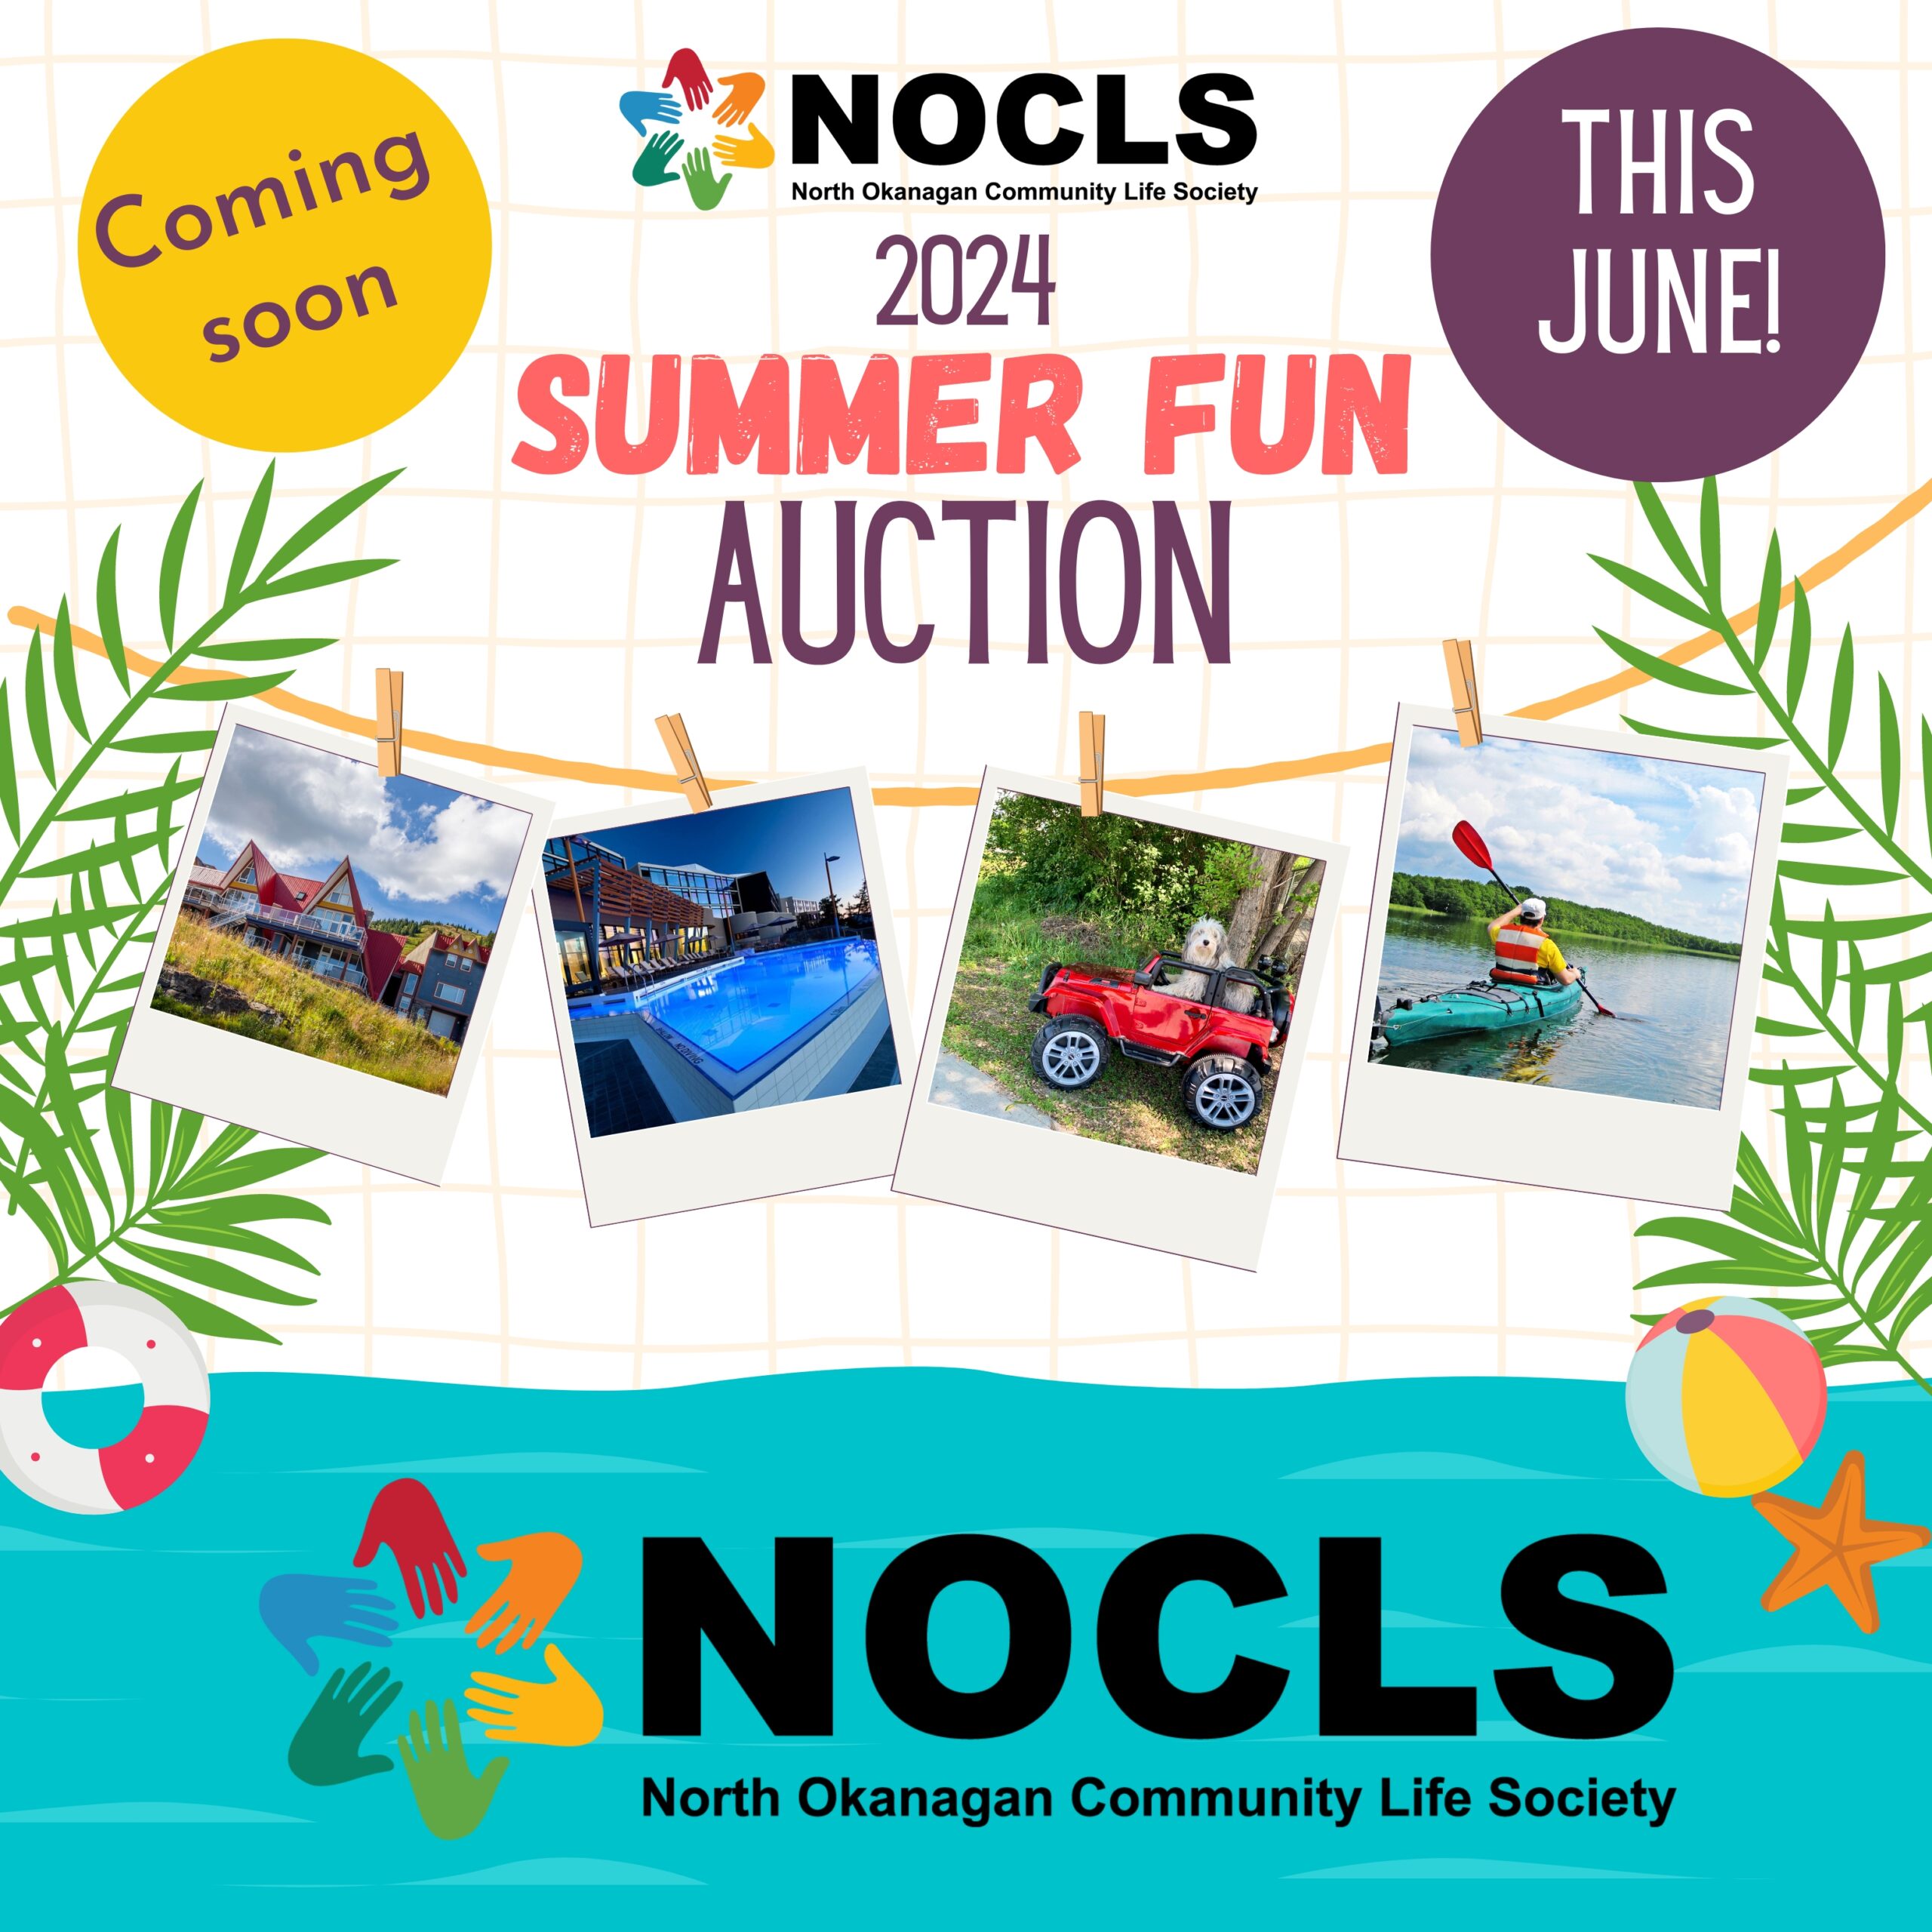 Coming Soon - NOCLS 2024 Summer Fun Auction. Beach themed poster.